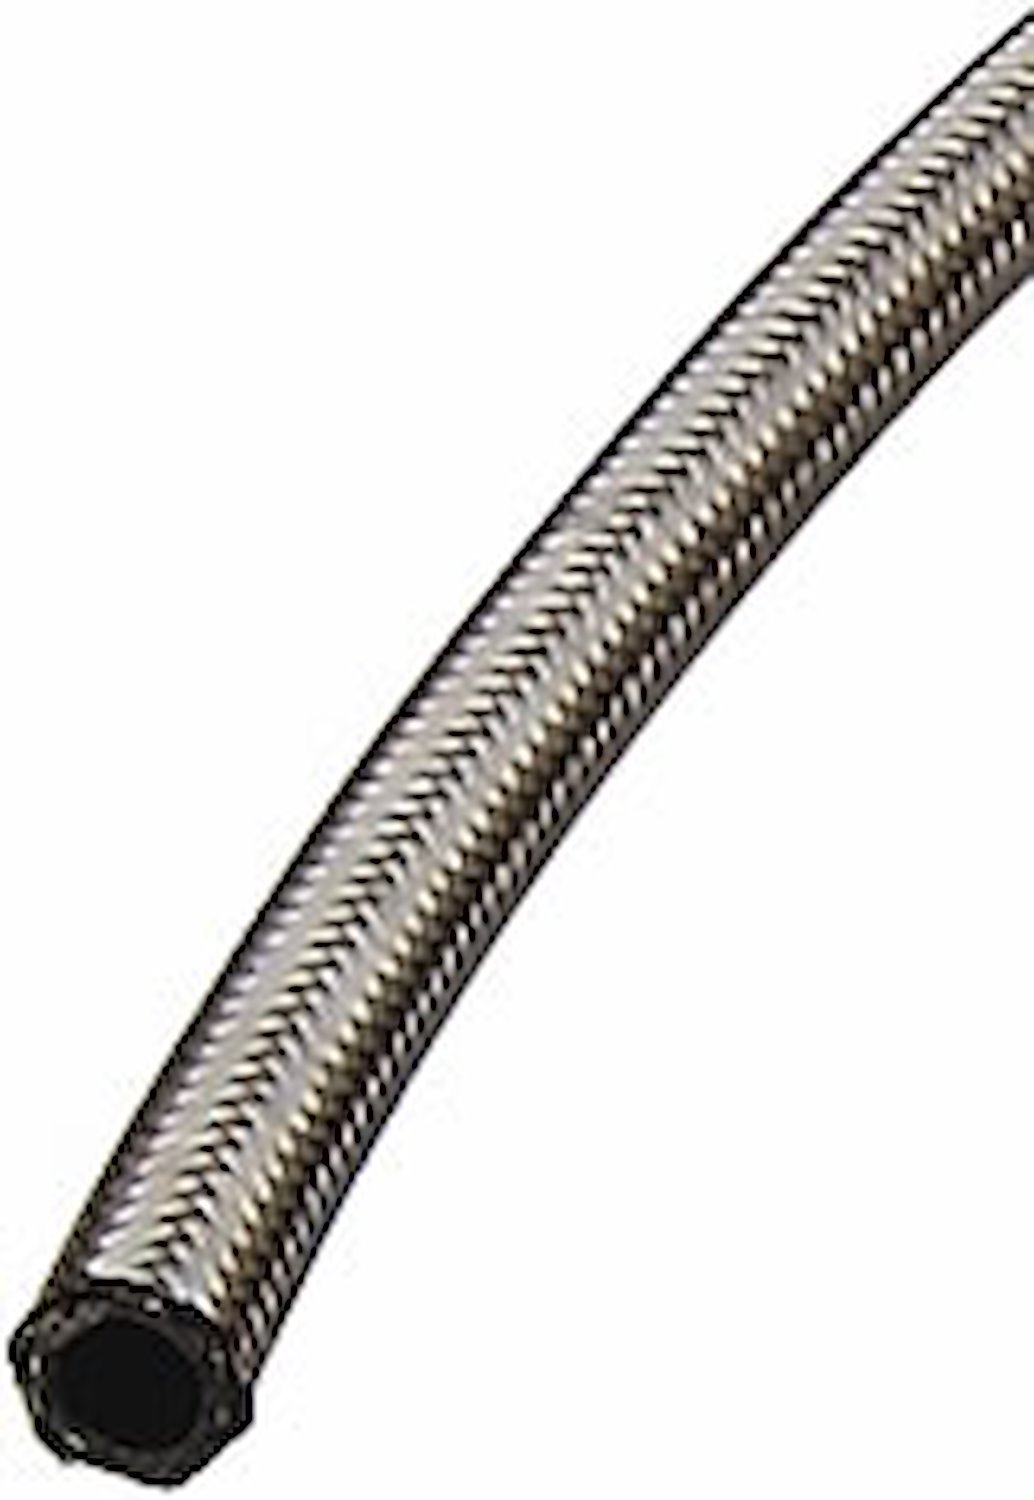 Pro-Flo 200 Series Stainless Steel Braided Hose -8 AN [10 ft.]